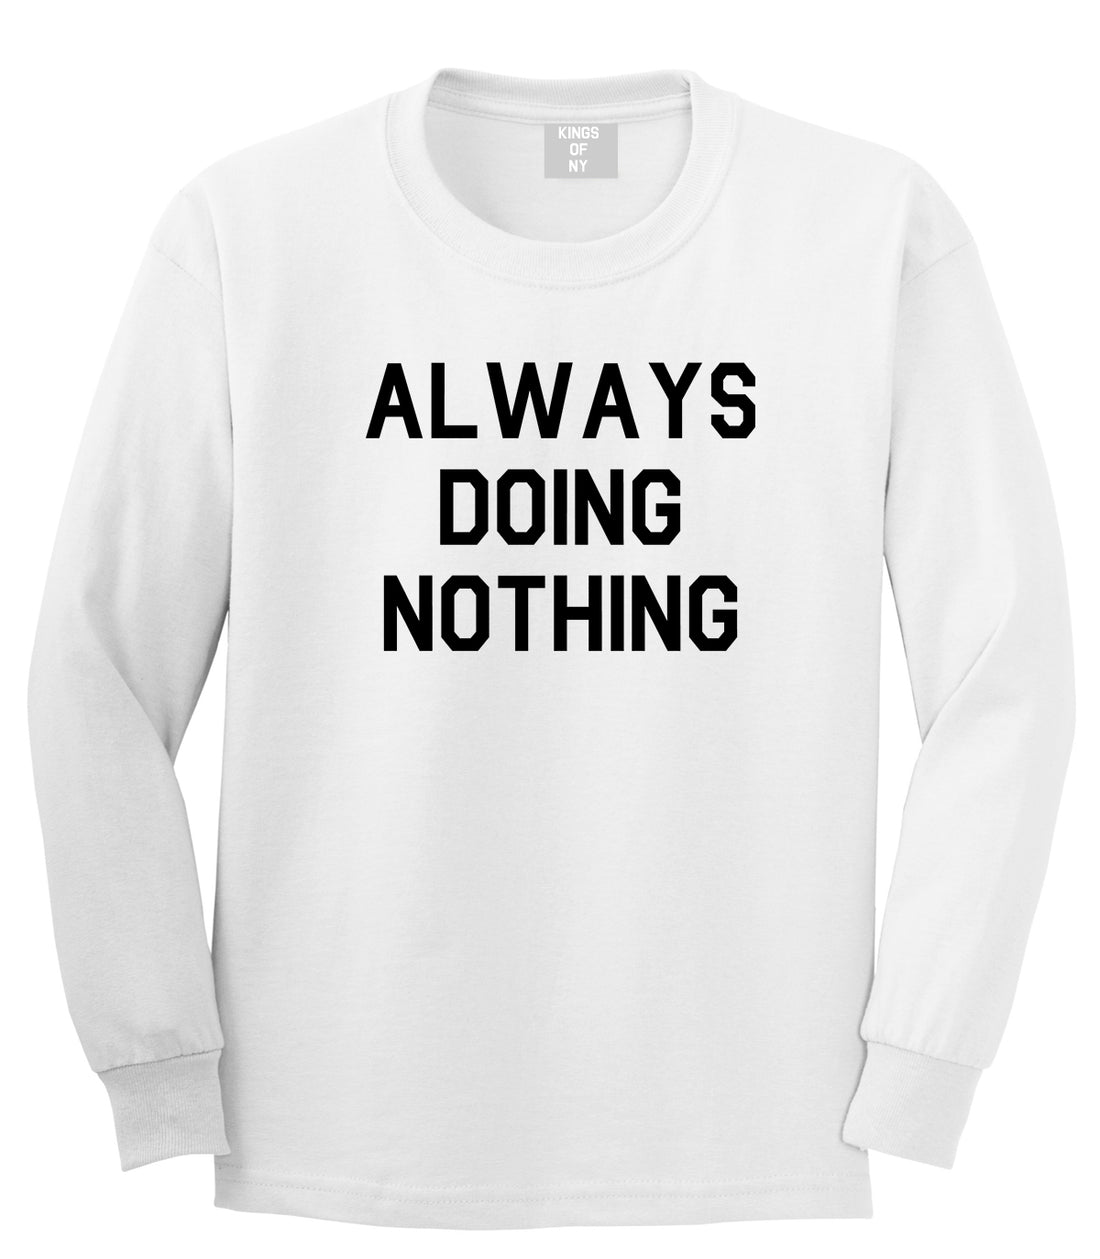 Always Doing Nothing Mens White Long Sleeve T-Shirt by Kings Of NY